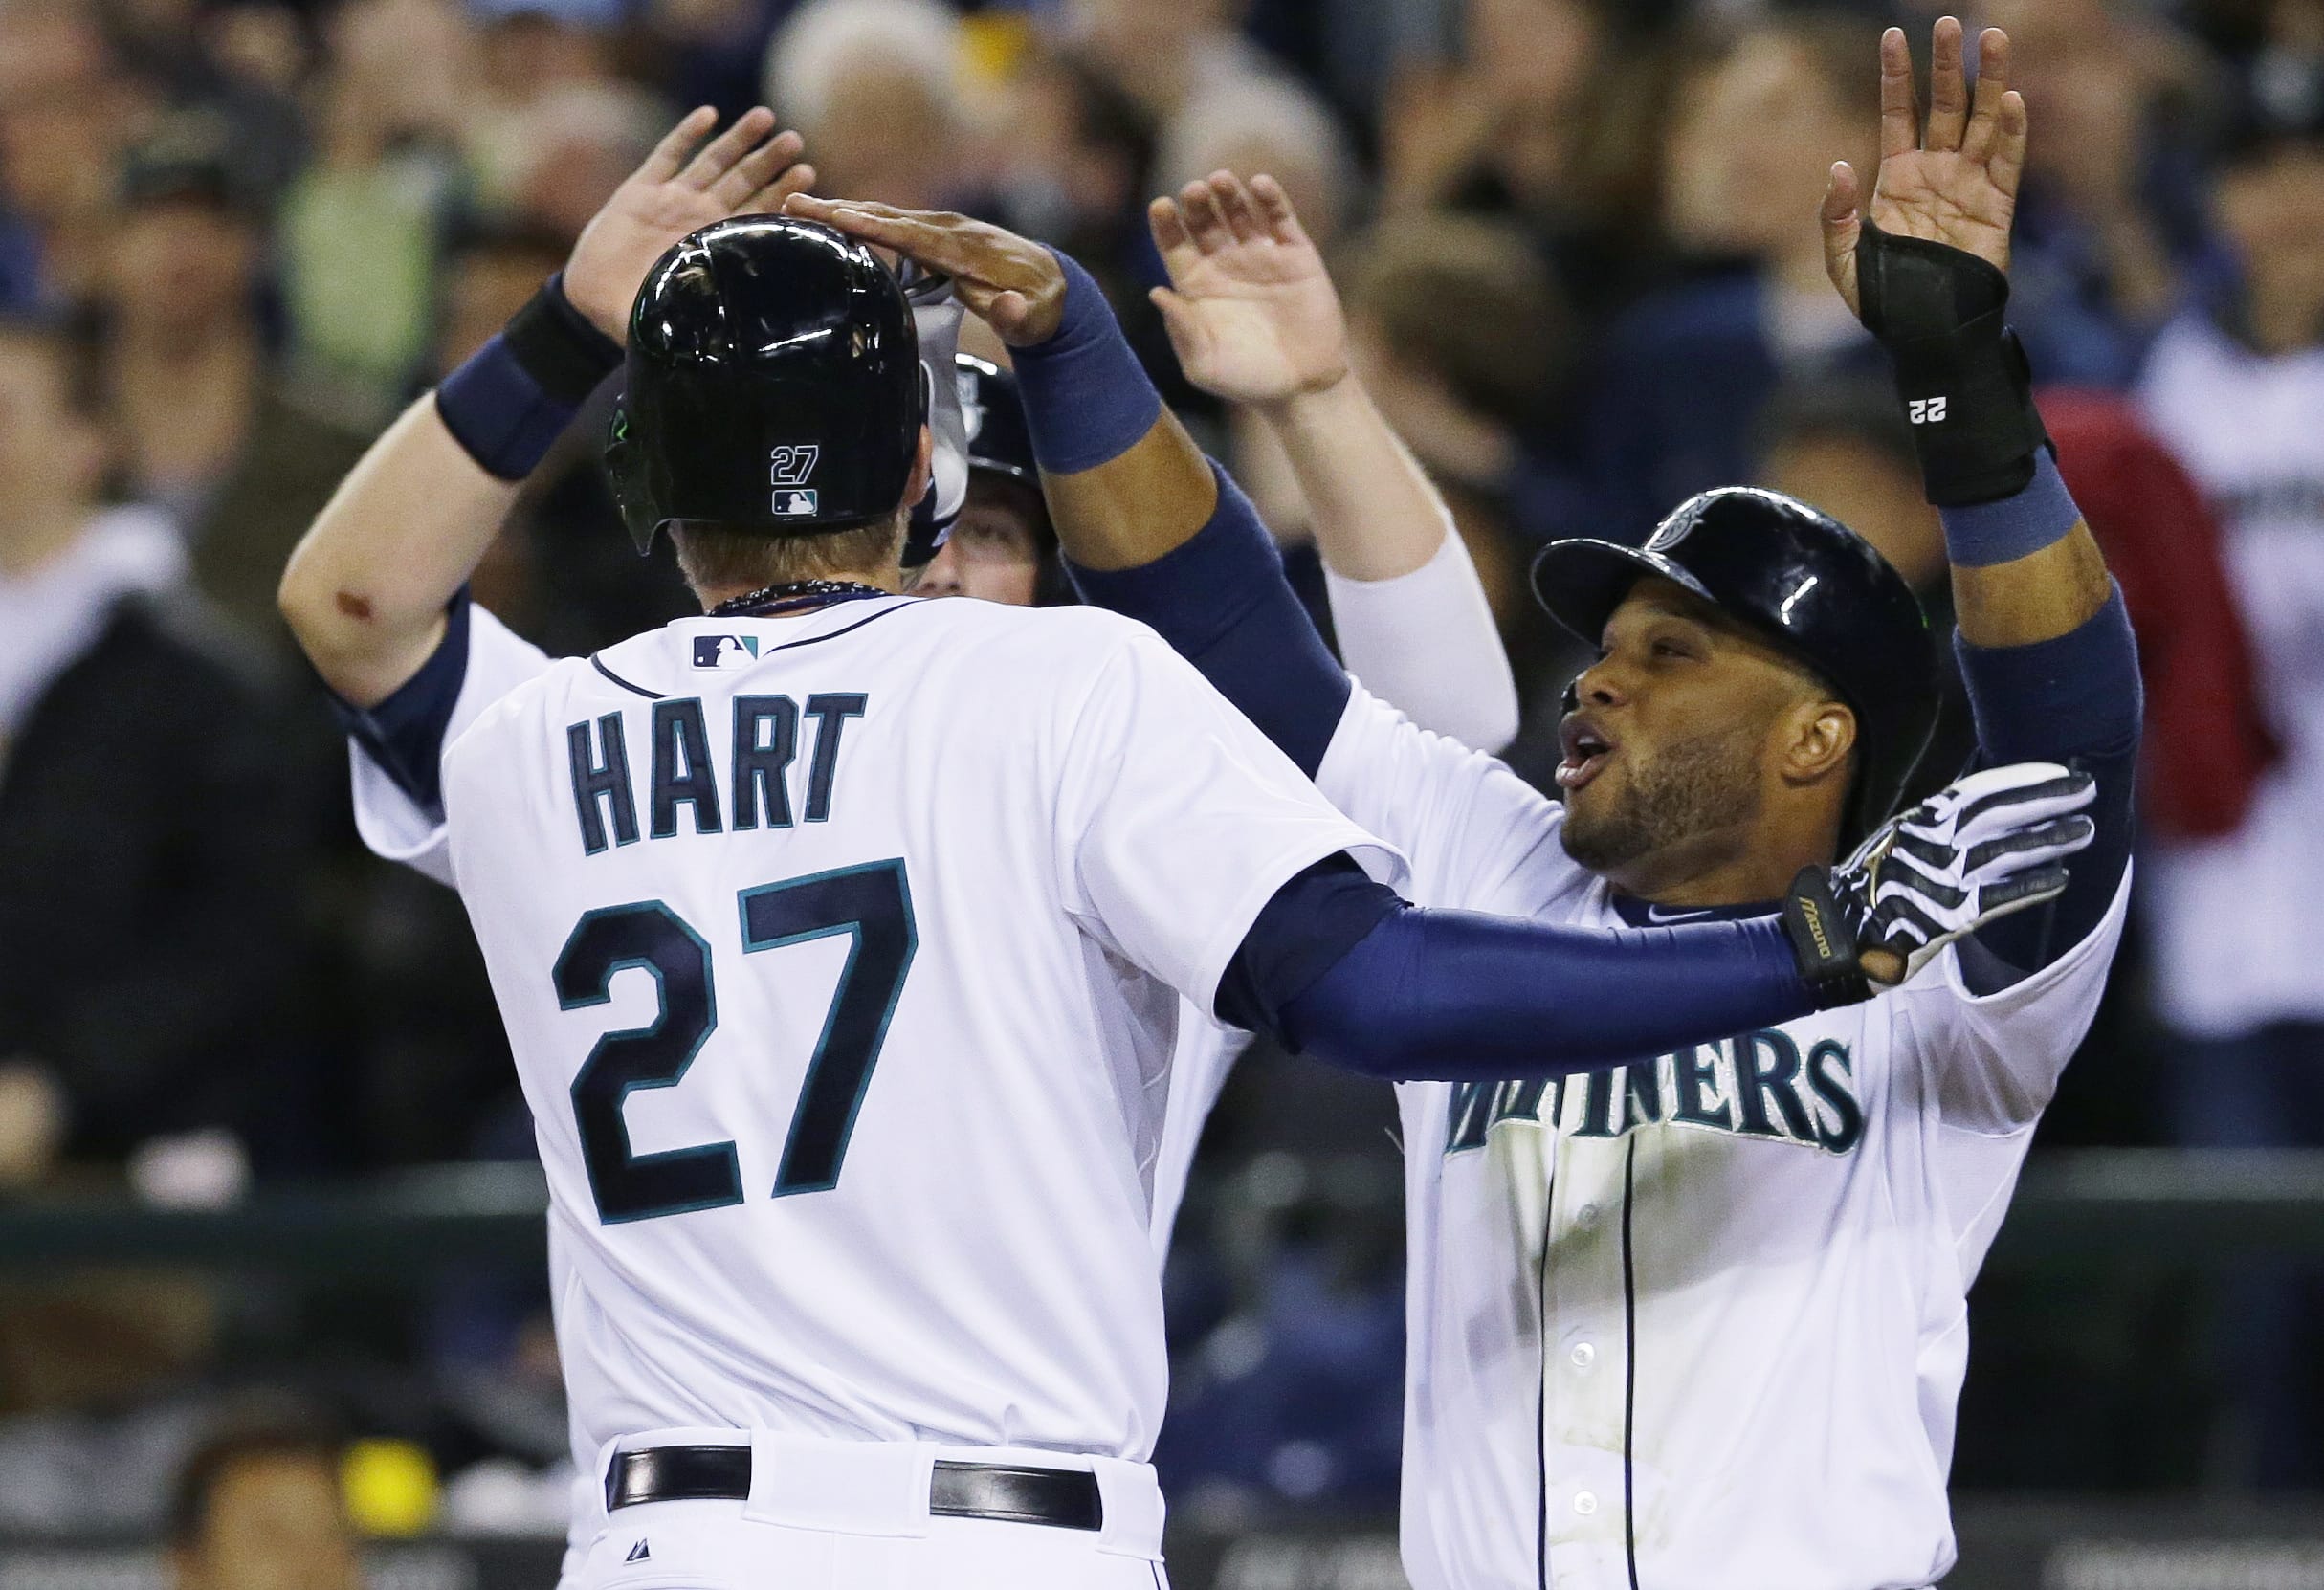 Seattle's Corey Hart (27) is greeted at the plate by Robinson Cano, right, and Justin Smoak after Hart's three-run home run.